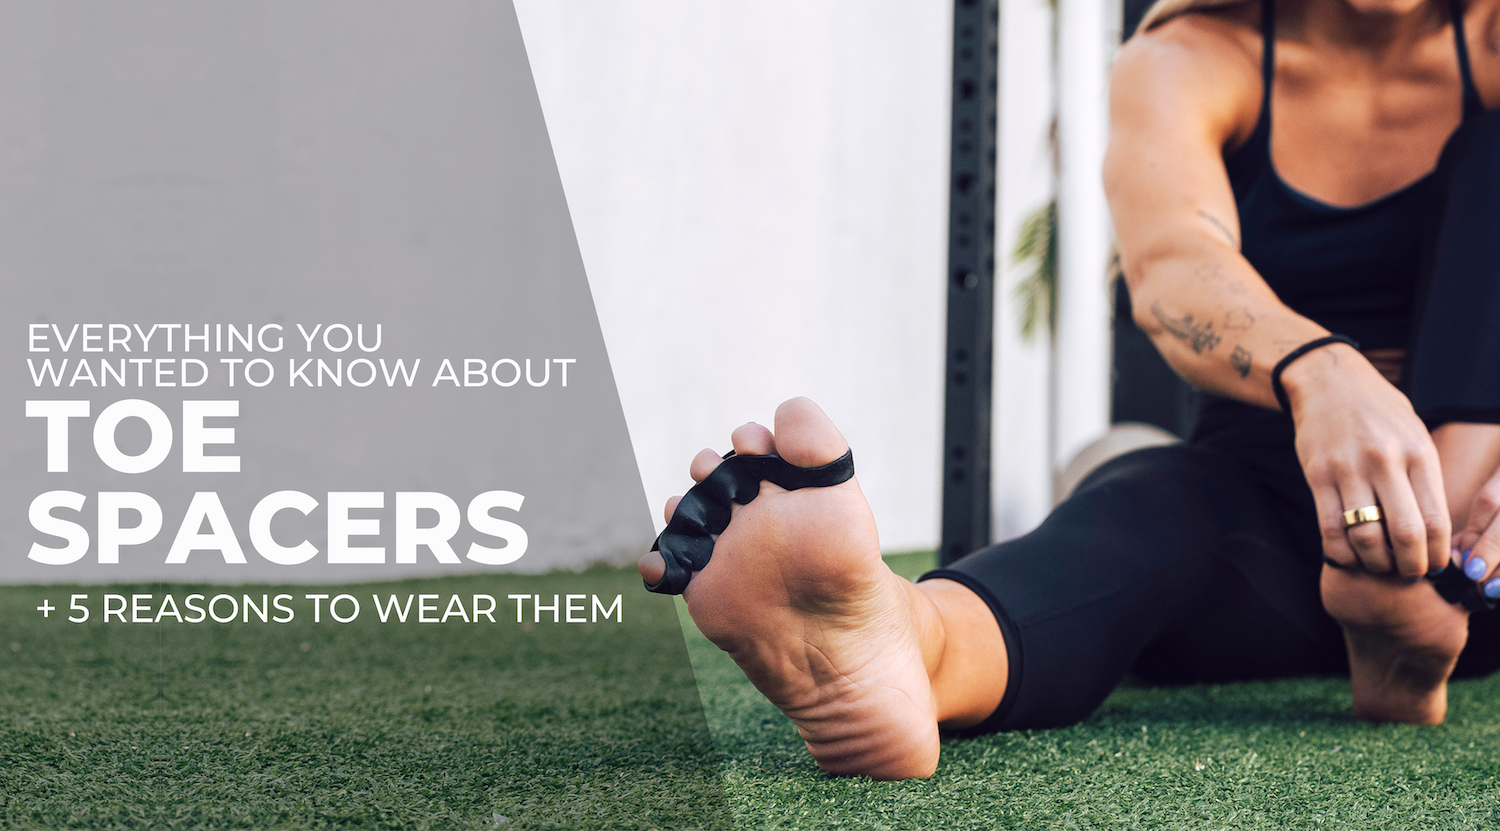 Everything You Wanted to Know About Toe Spacers (+ 5 reasons to